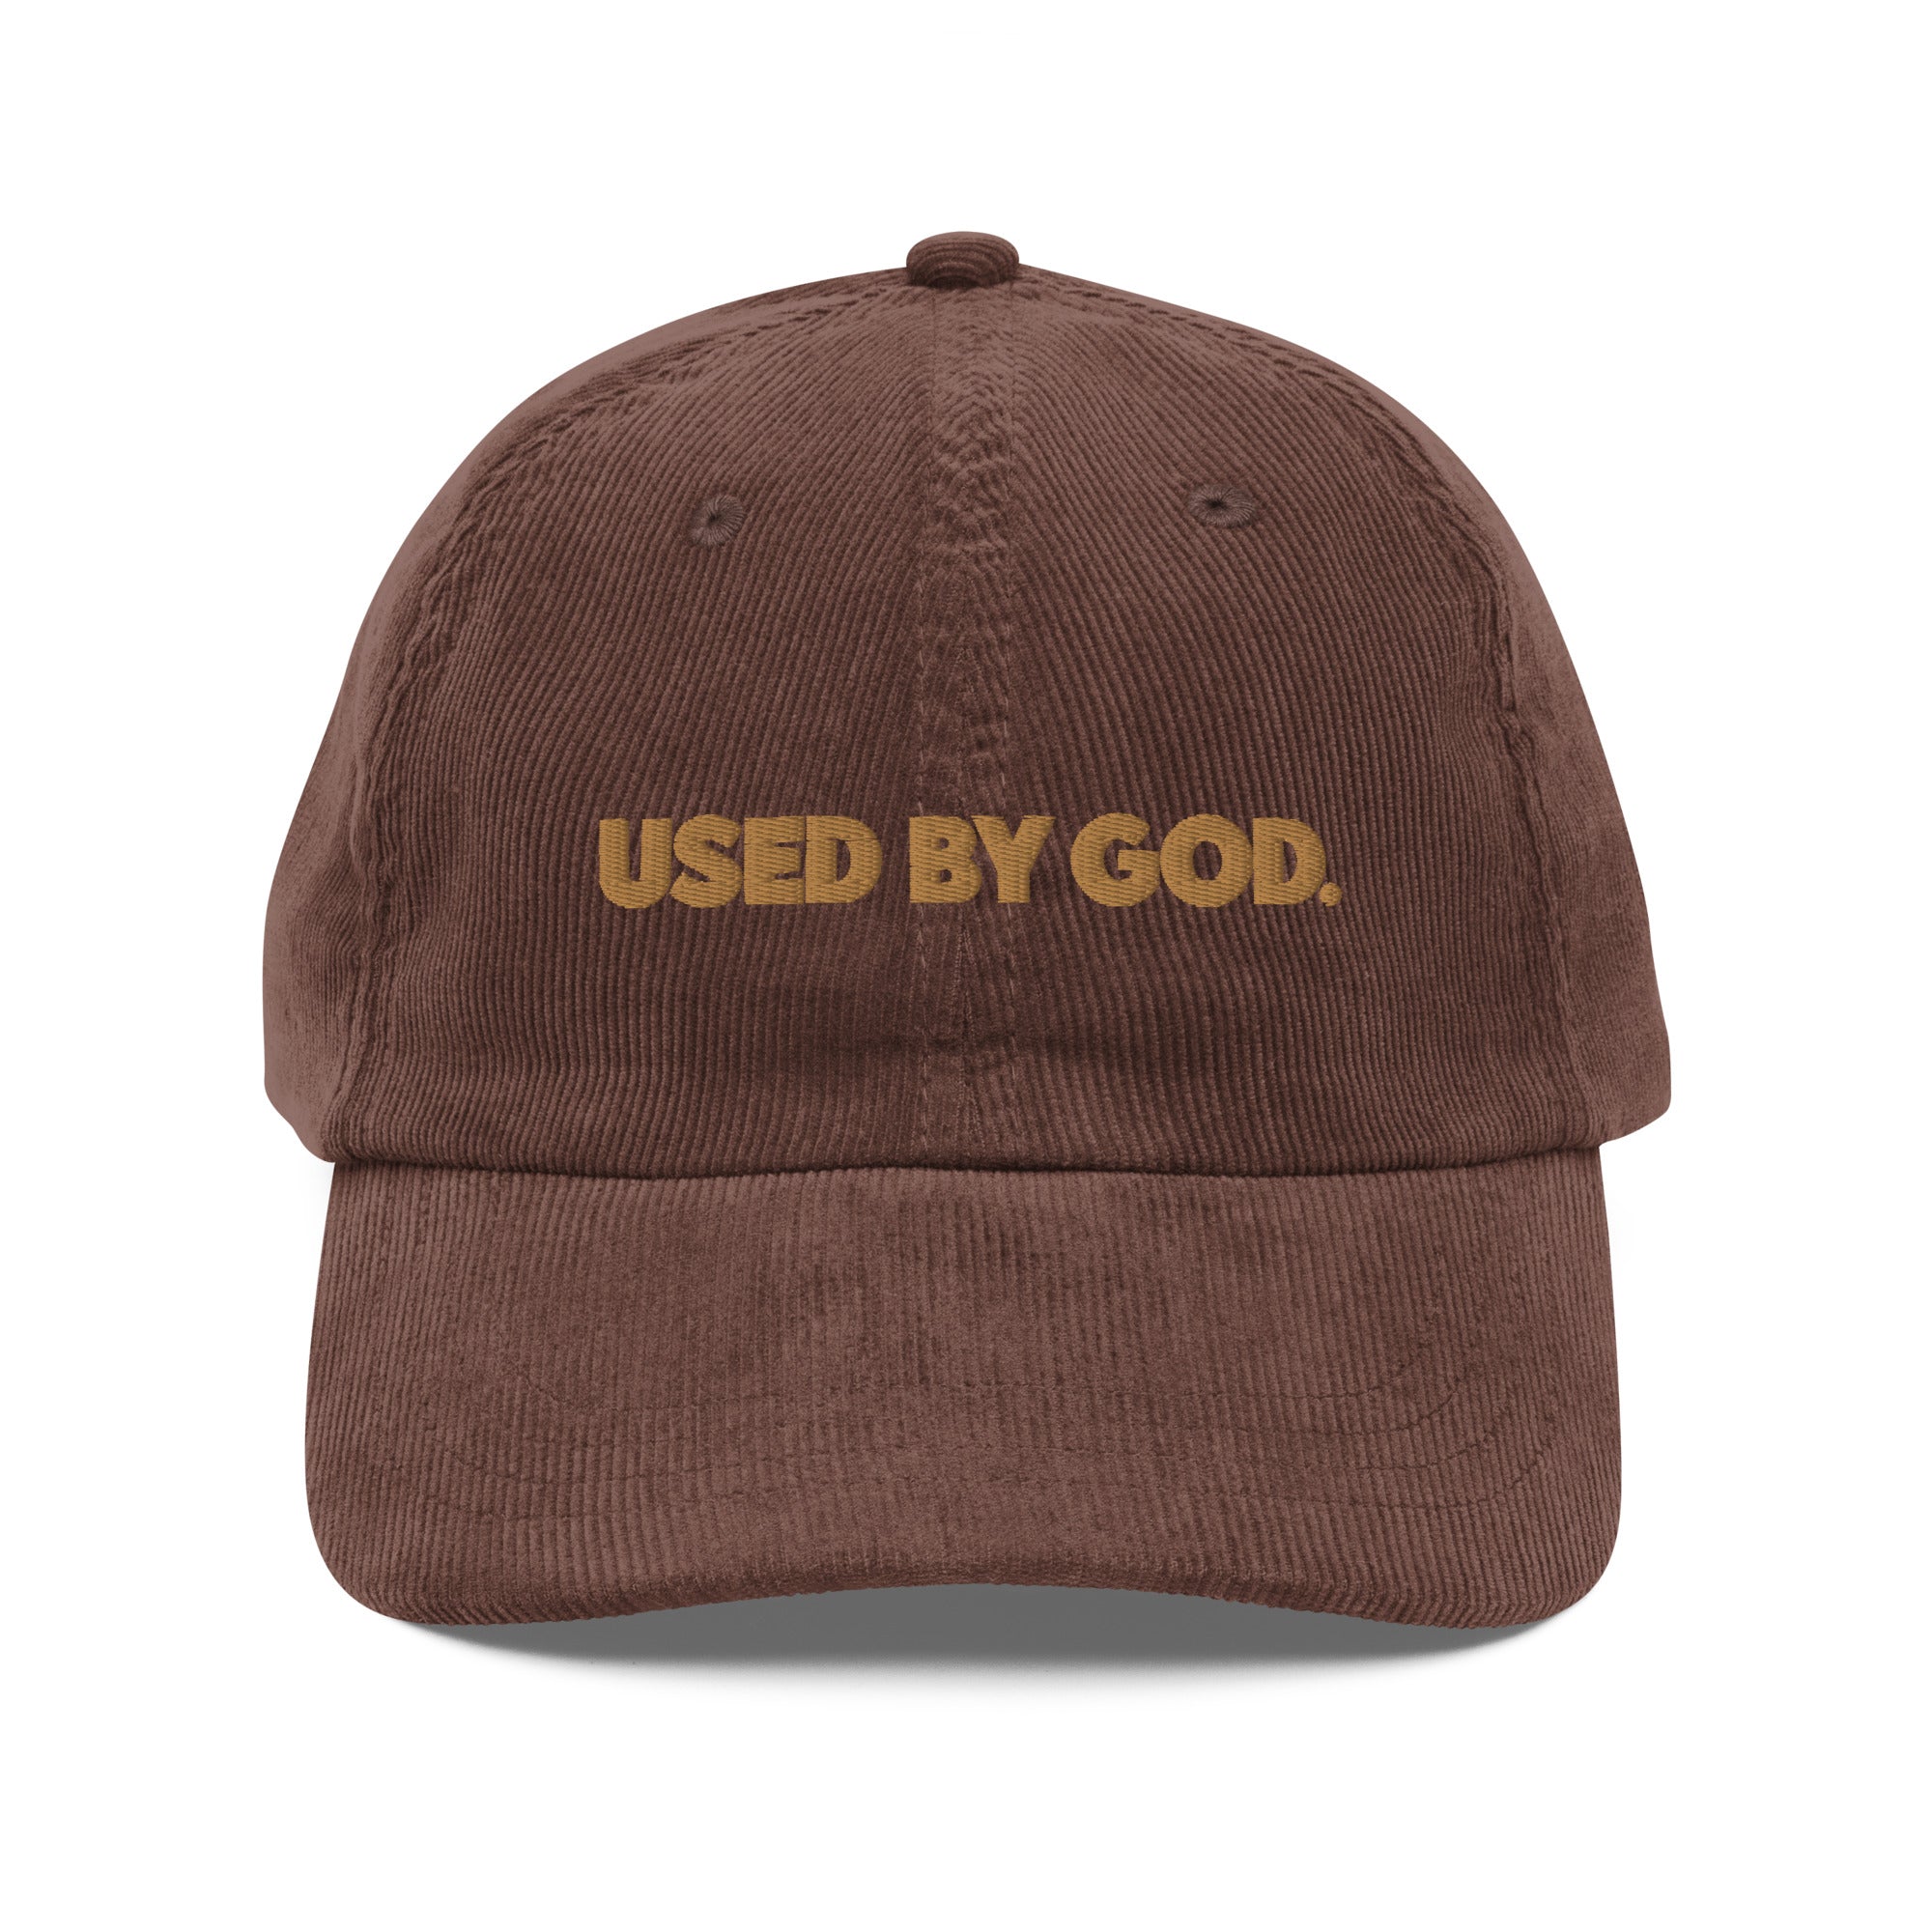 UBG Camel Corduroy, Used By God, Used By God Clothing, Christian Apparel, Christian Hats, Christian T-Shirts, Christian Clothing, God Shirts, Christian Sweatshirts, God Clothing, Jesus Hoodie, Jesus Clothes, God Is Dope, Art Of Homage, Red Letter Clothing, Elevated Faith, Active Faith Sports, Beacon Threads, God The Father Apparel